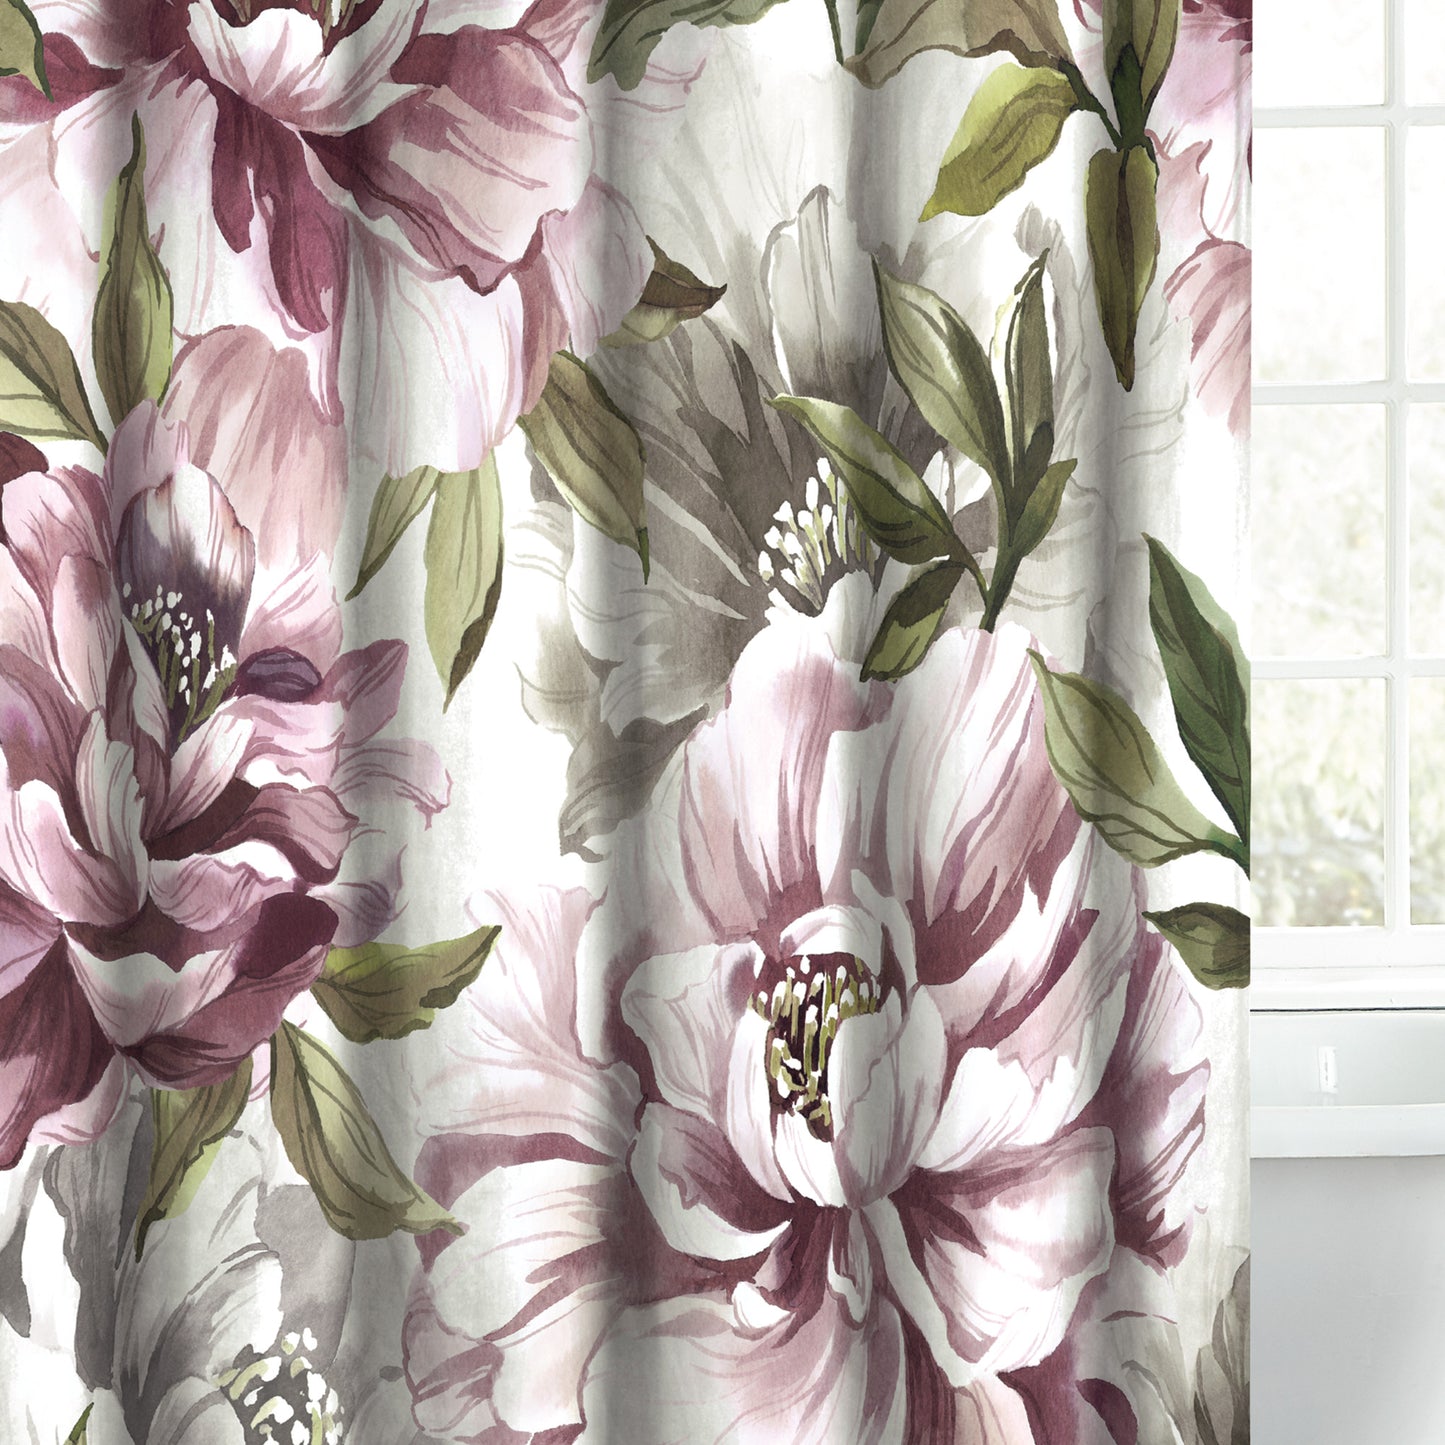 Peri Home Peony Blooms Shower Curtain